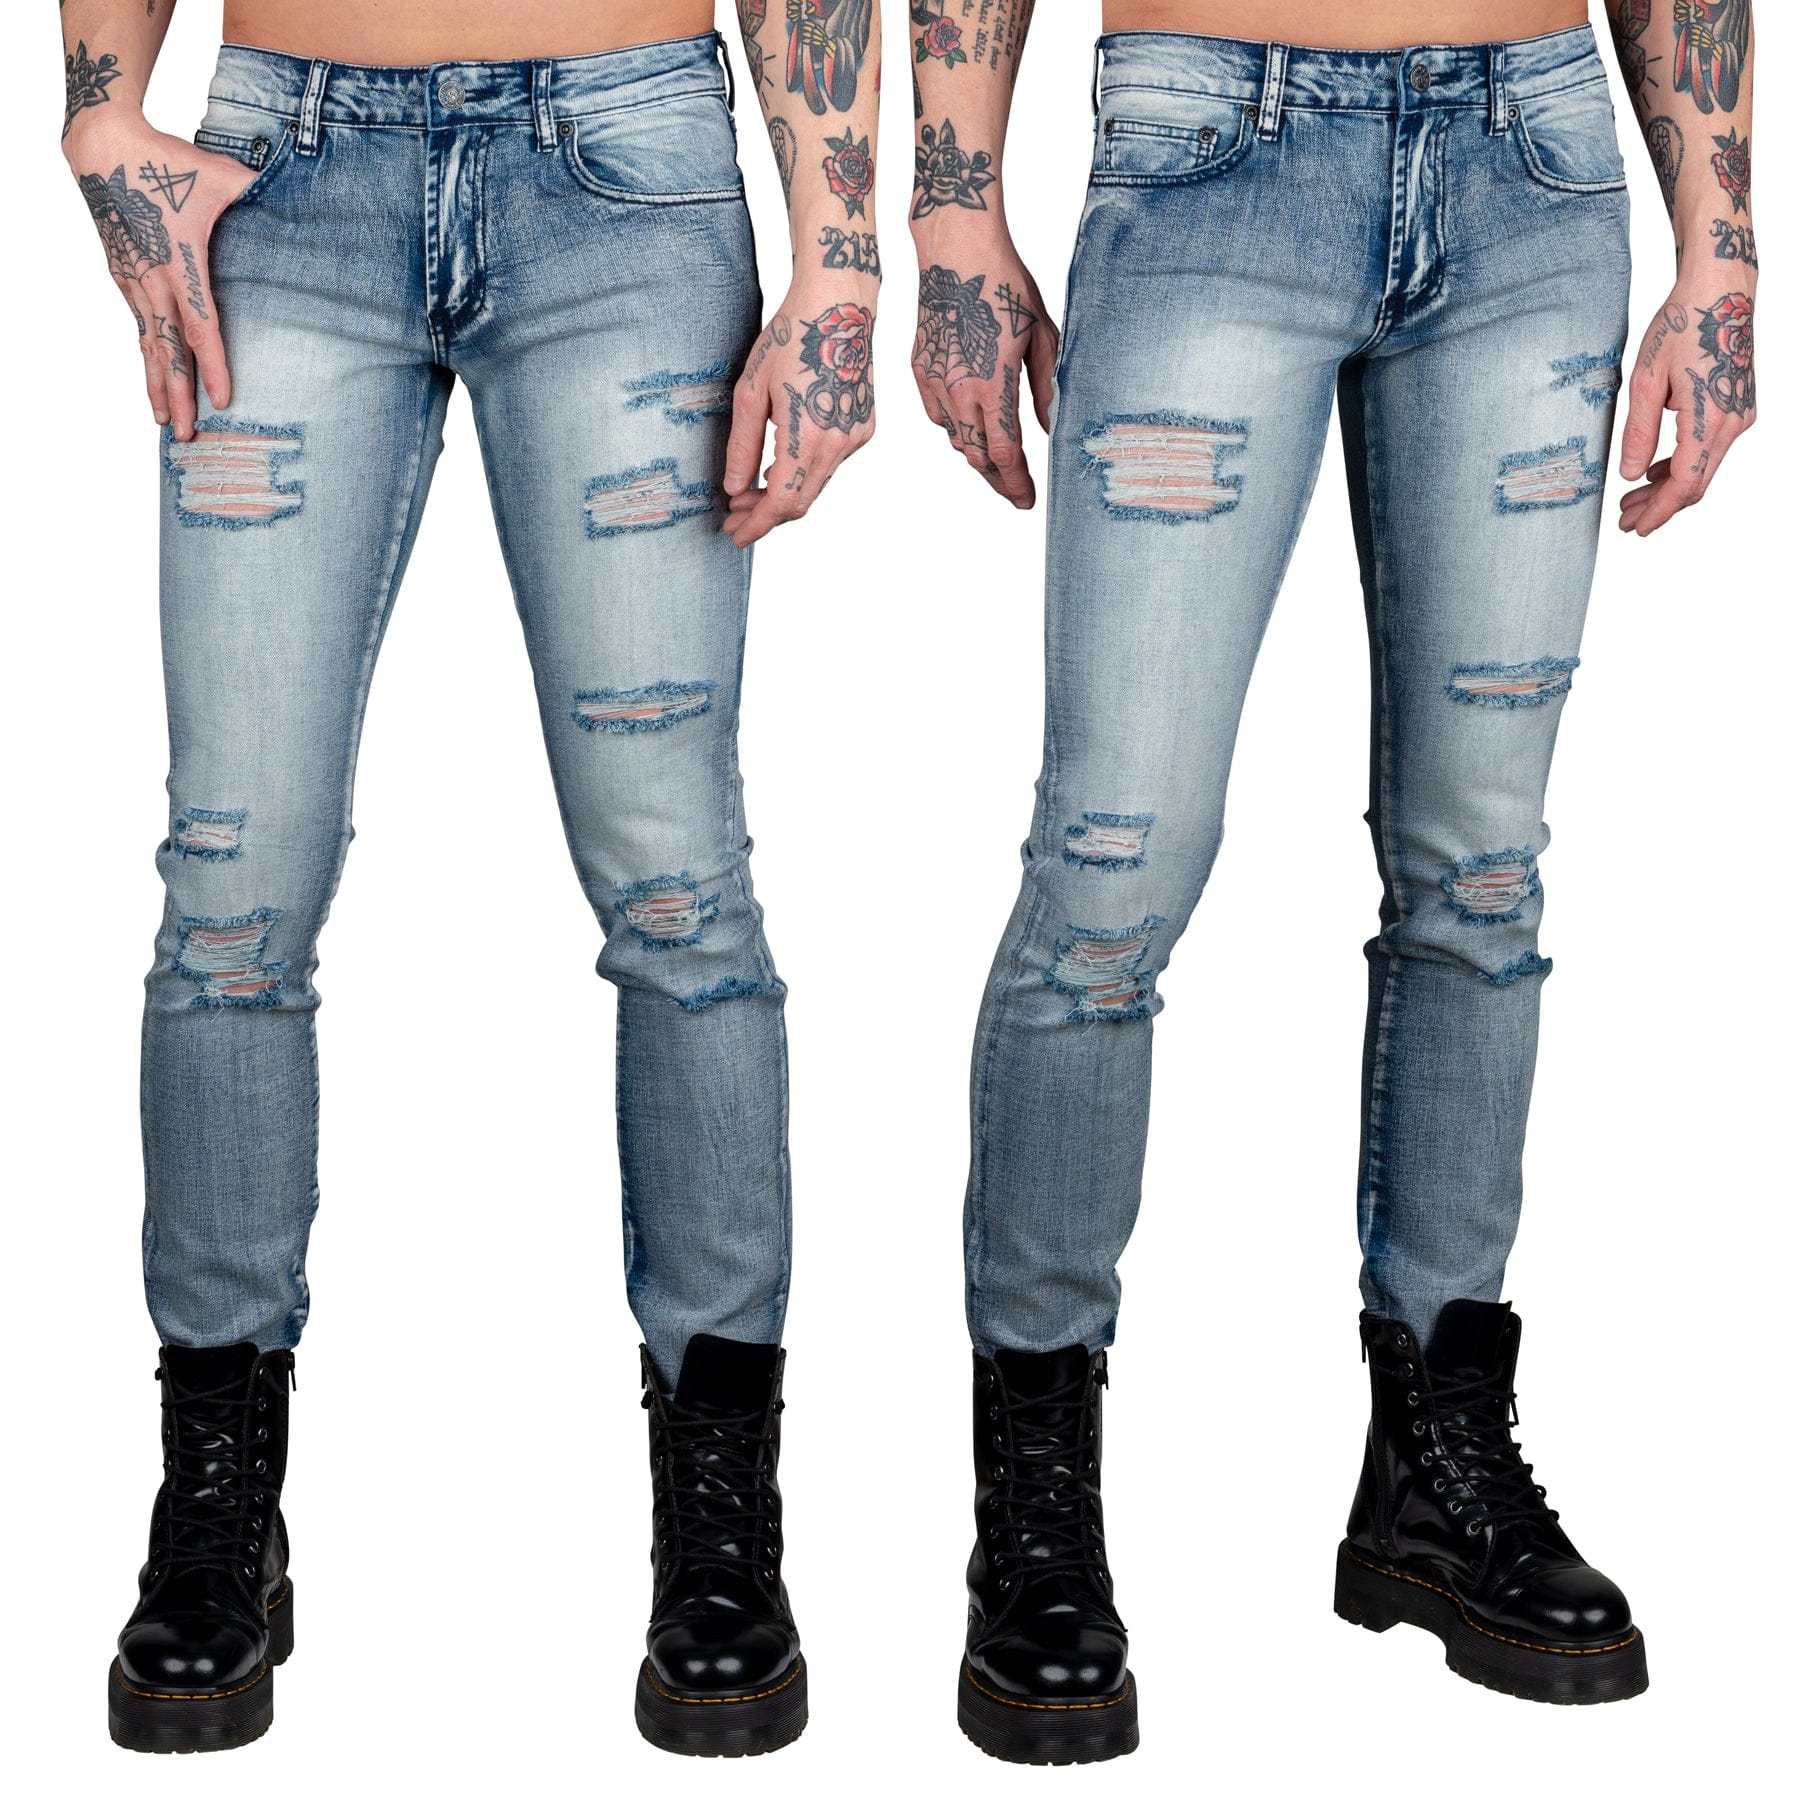 Essentials Collection Pants Rampager Shredded Jeans - Classic Blue